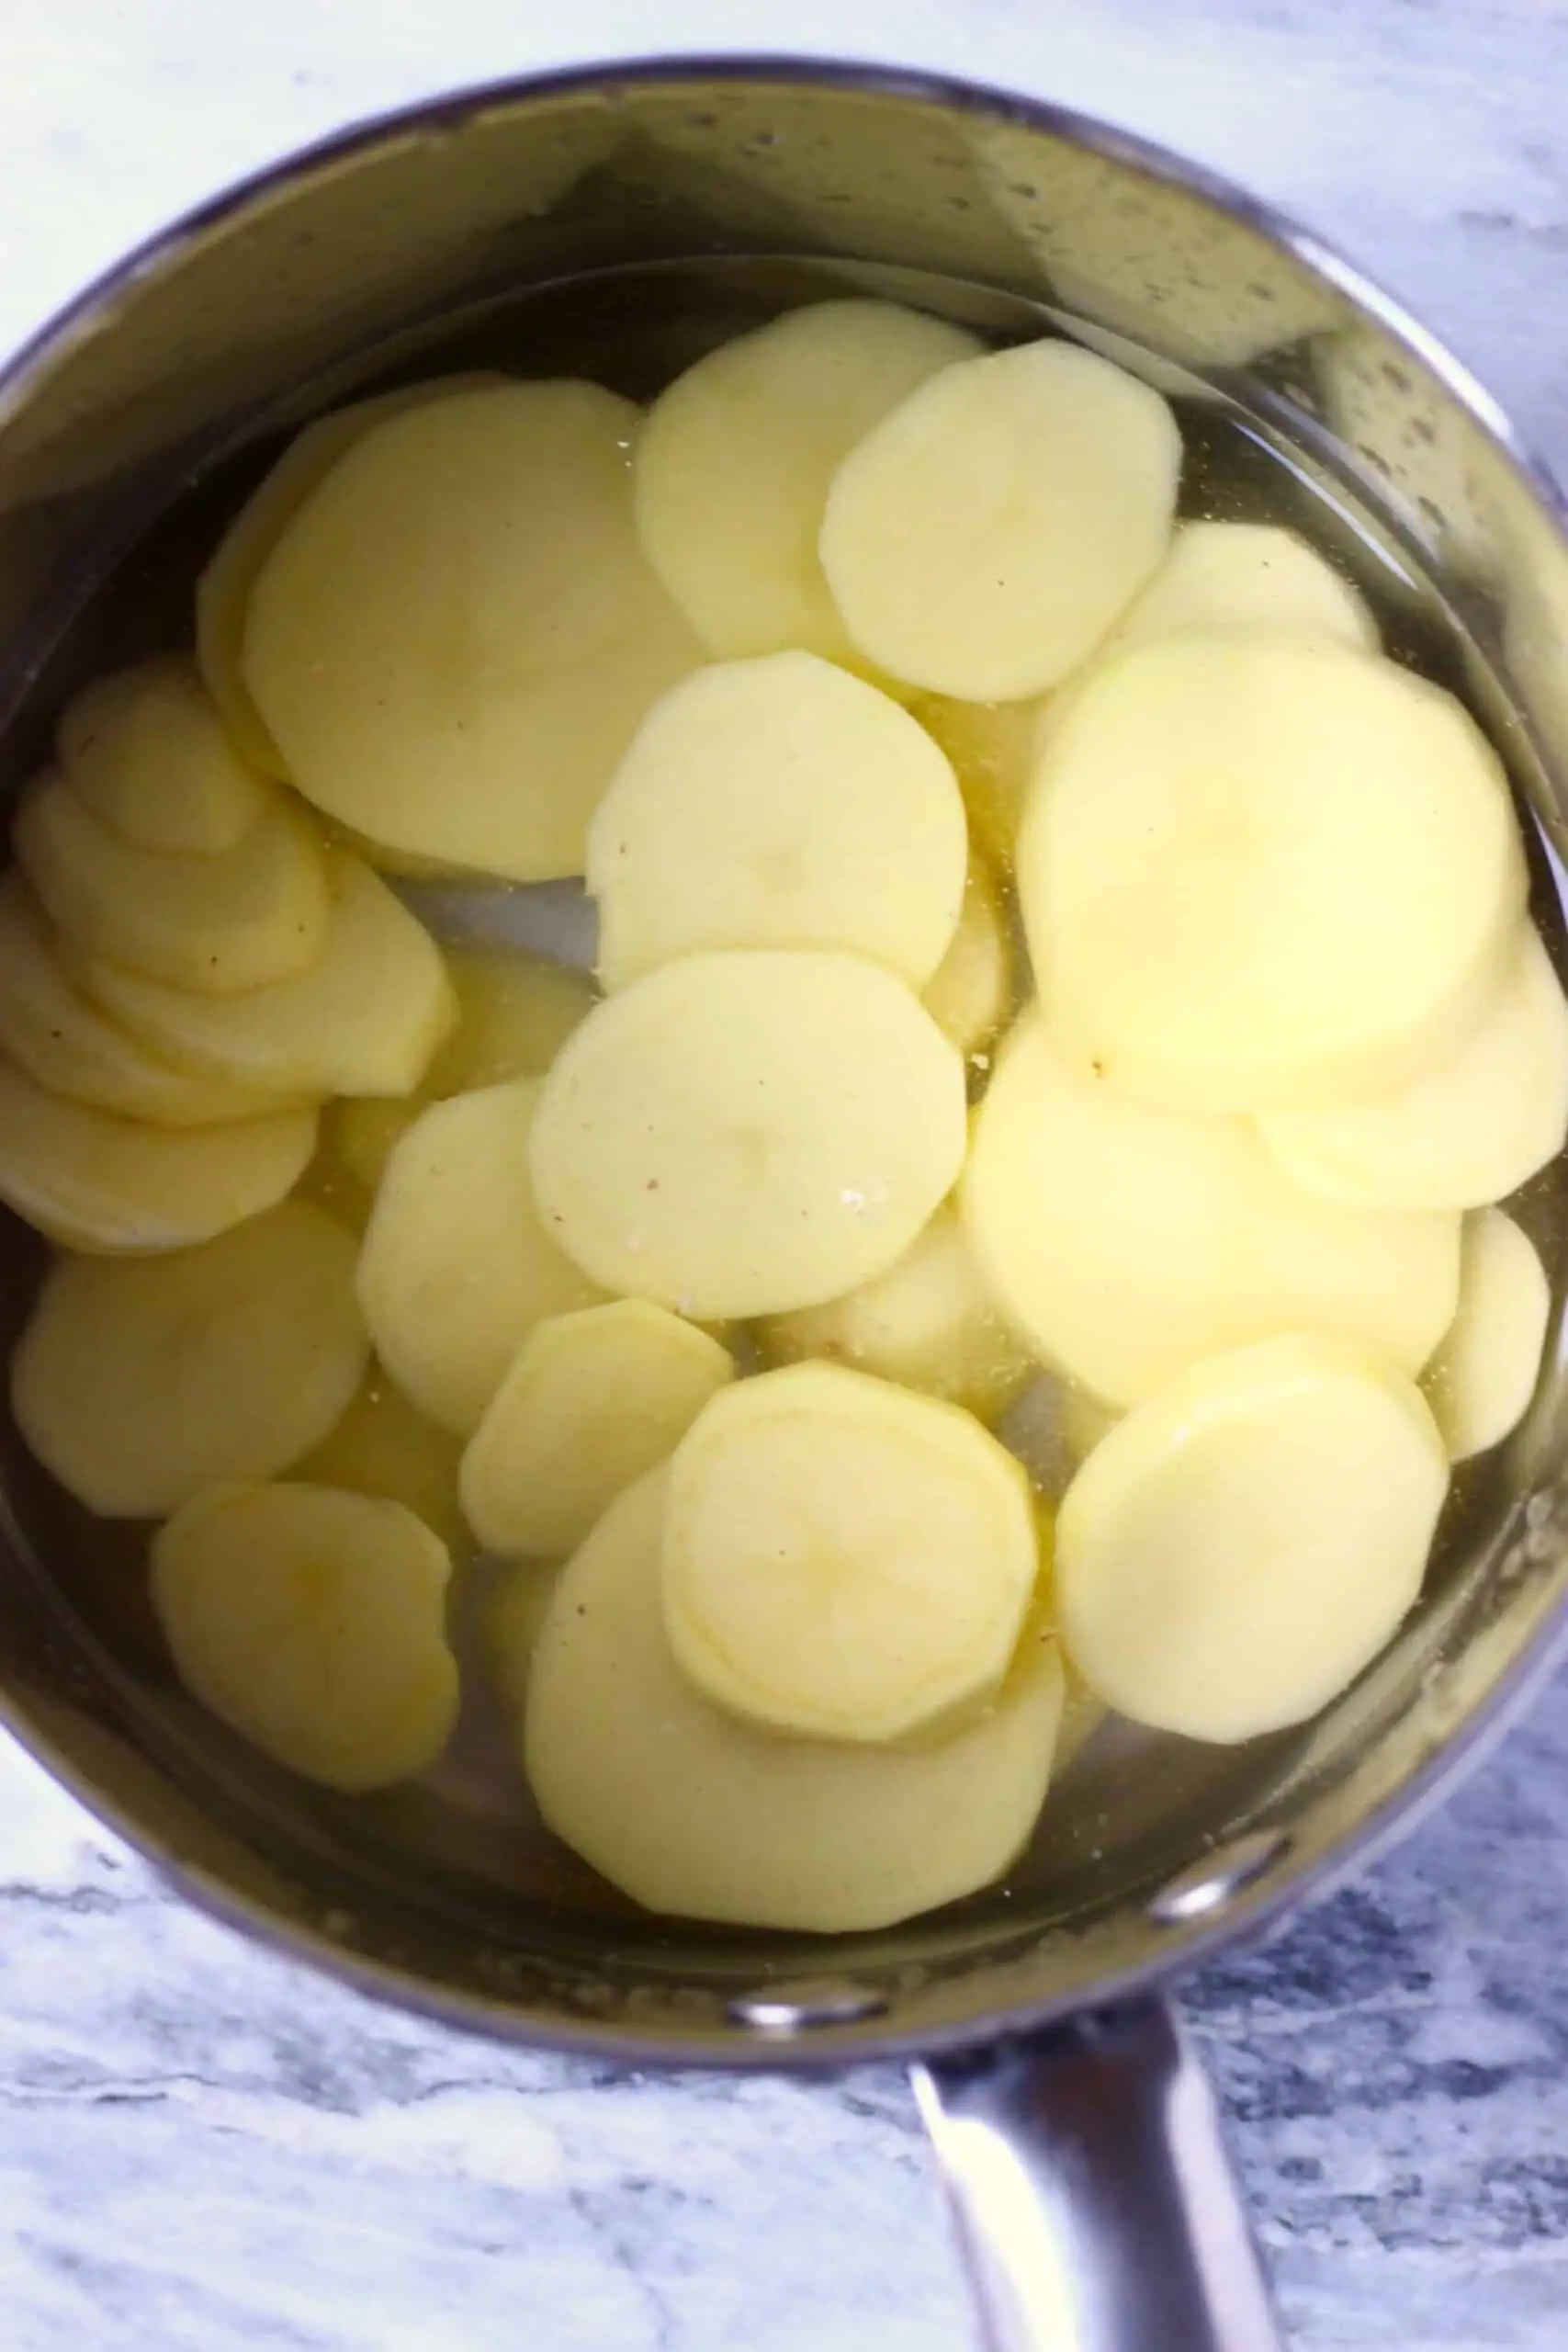 Sliced potatoes and water in a pan